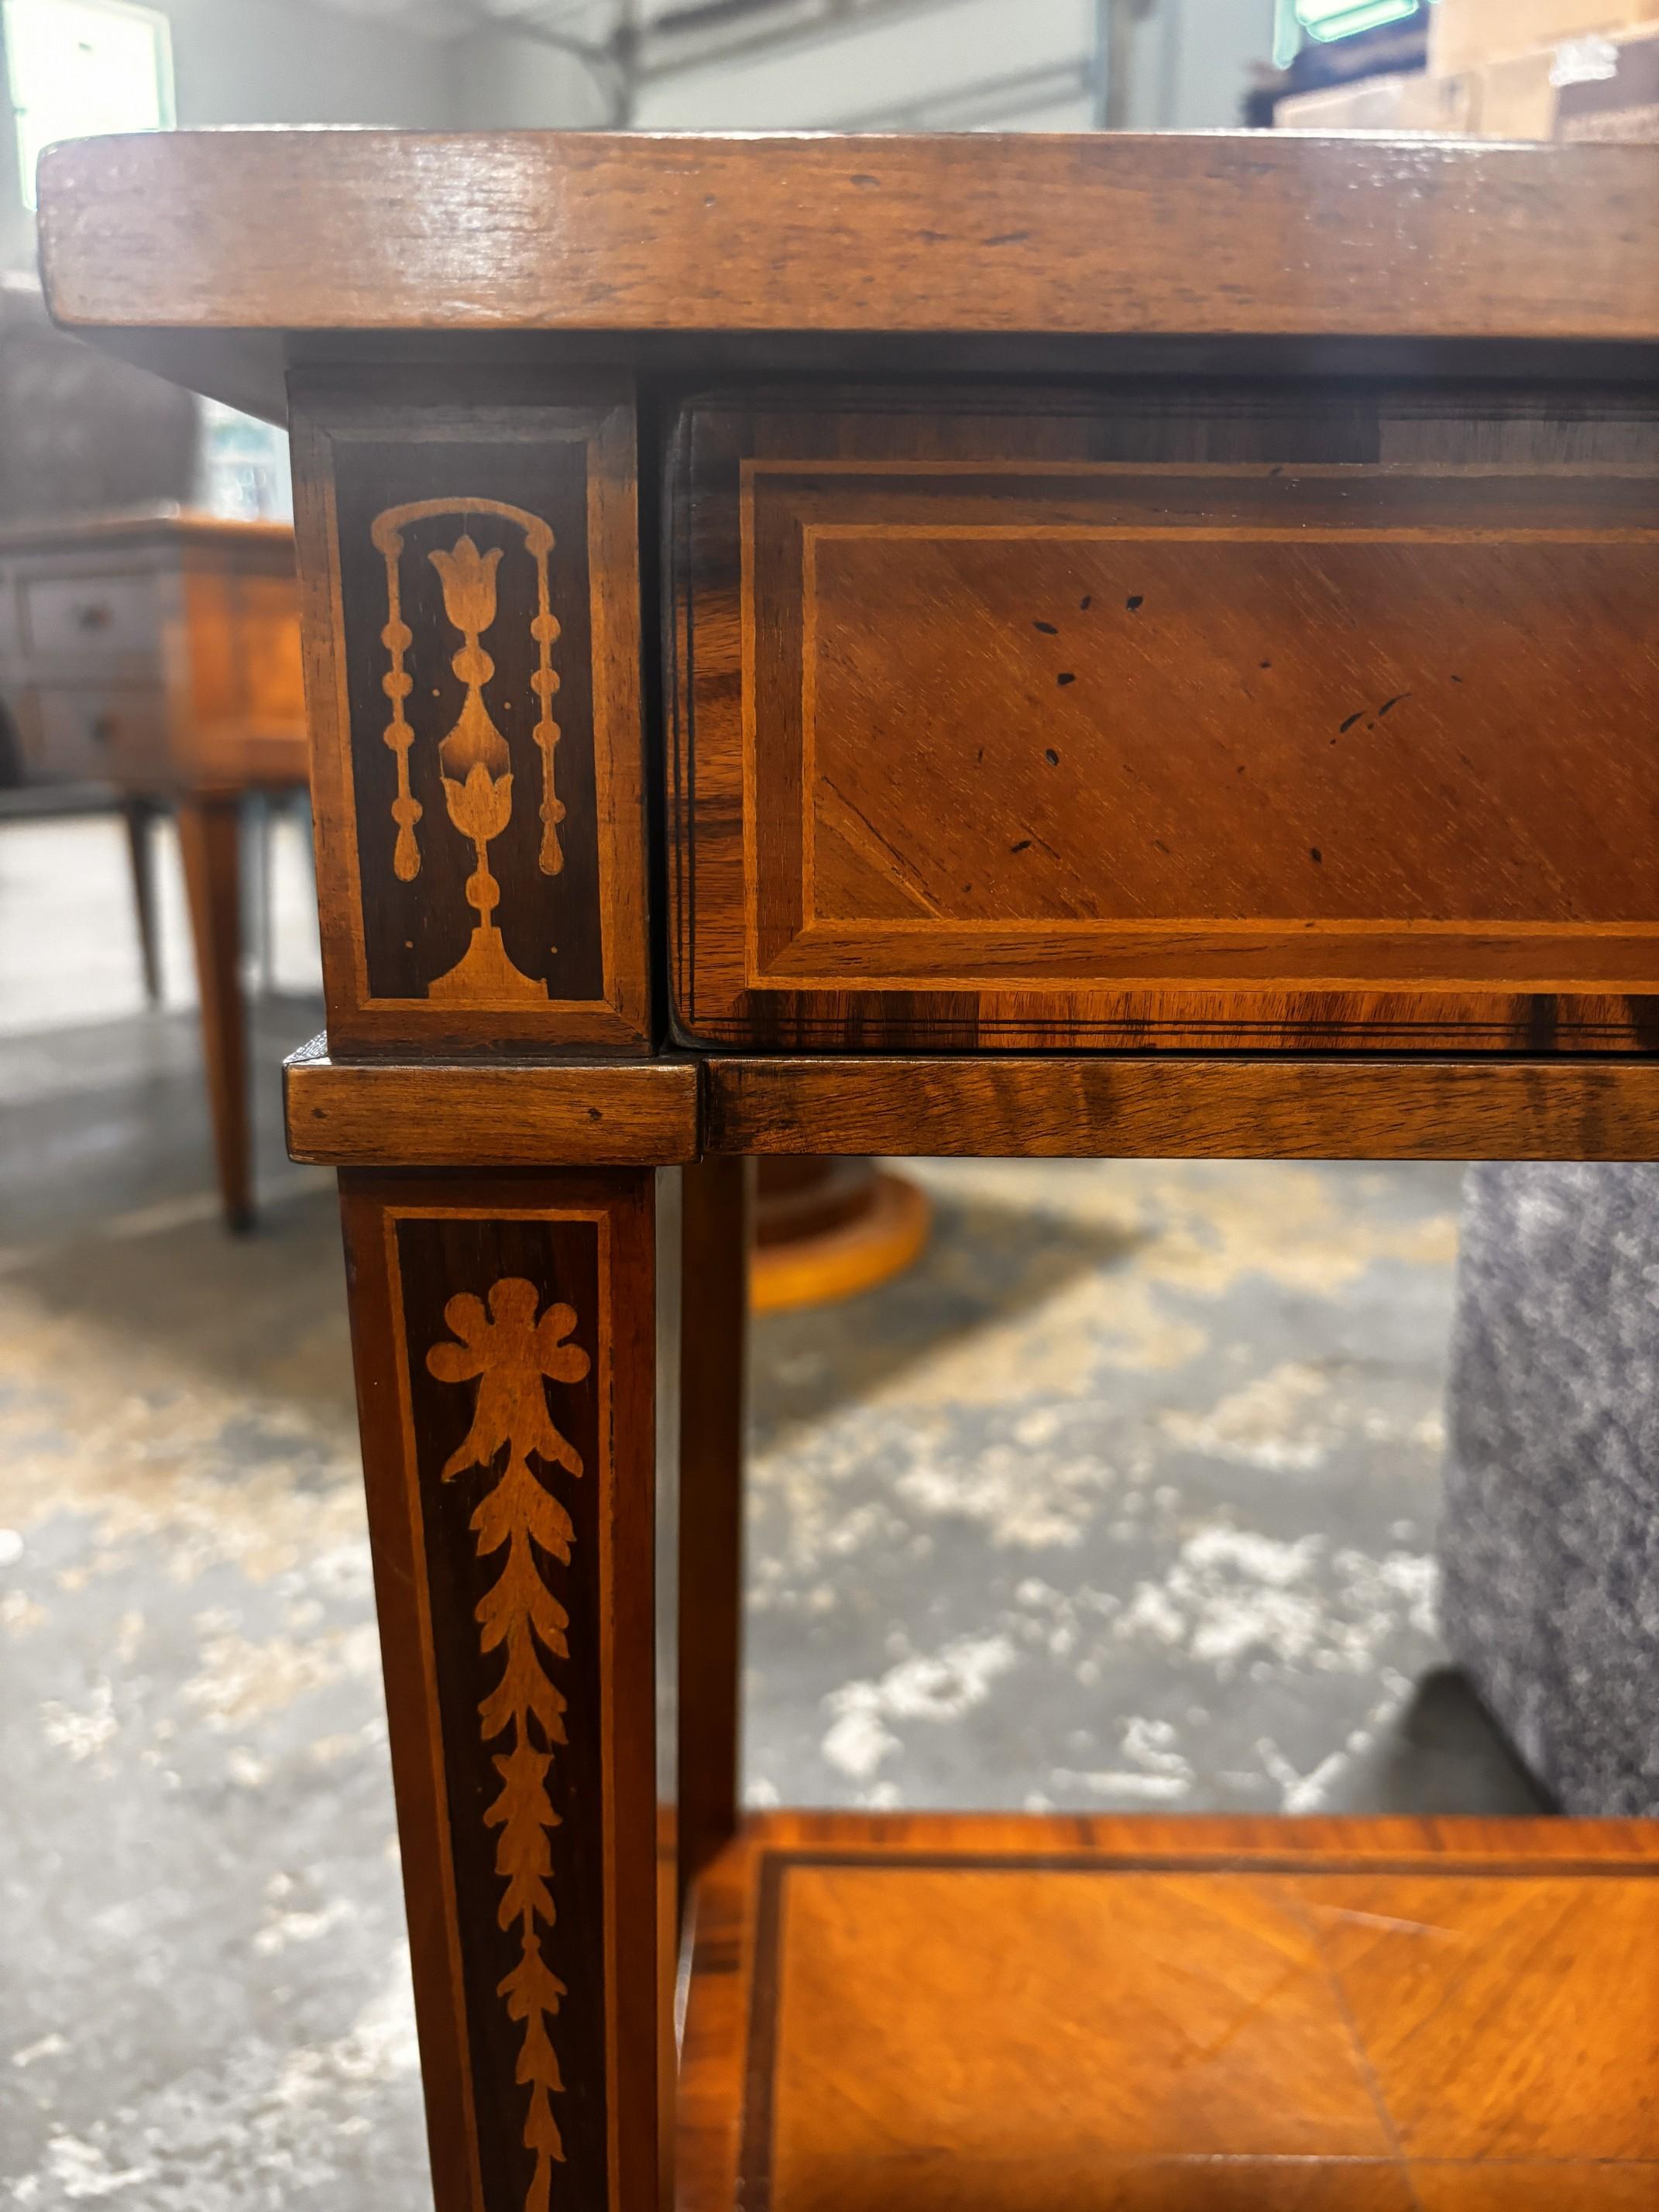 Antique Inlaid Wood Table W/ Brass Accents